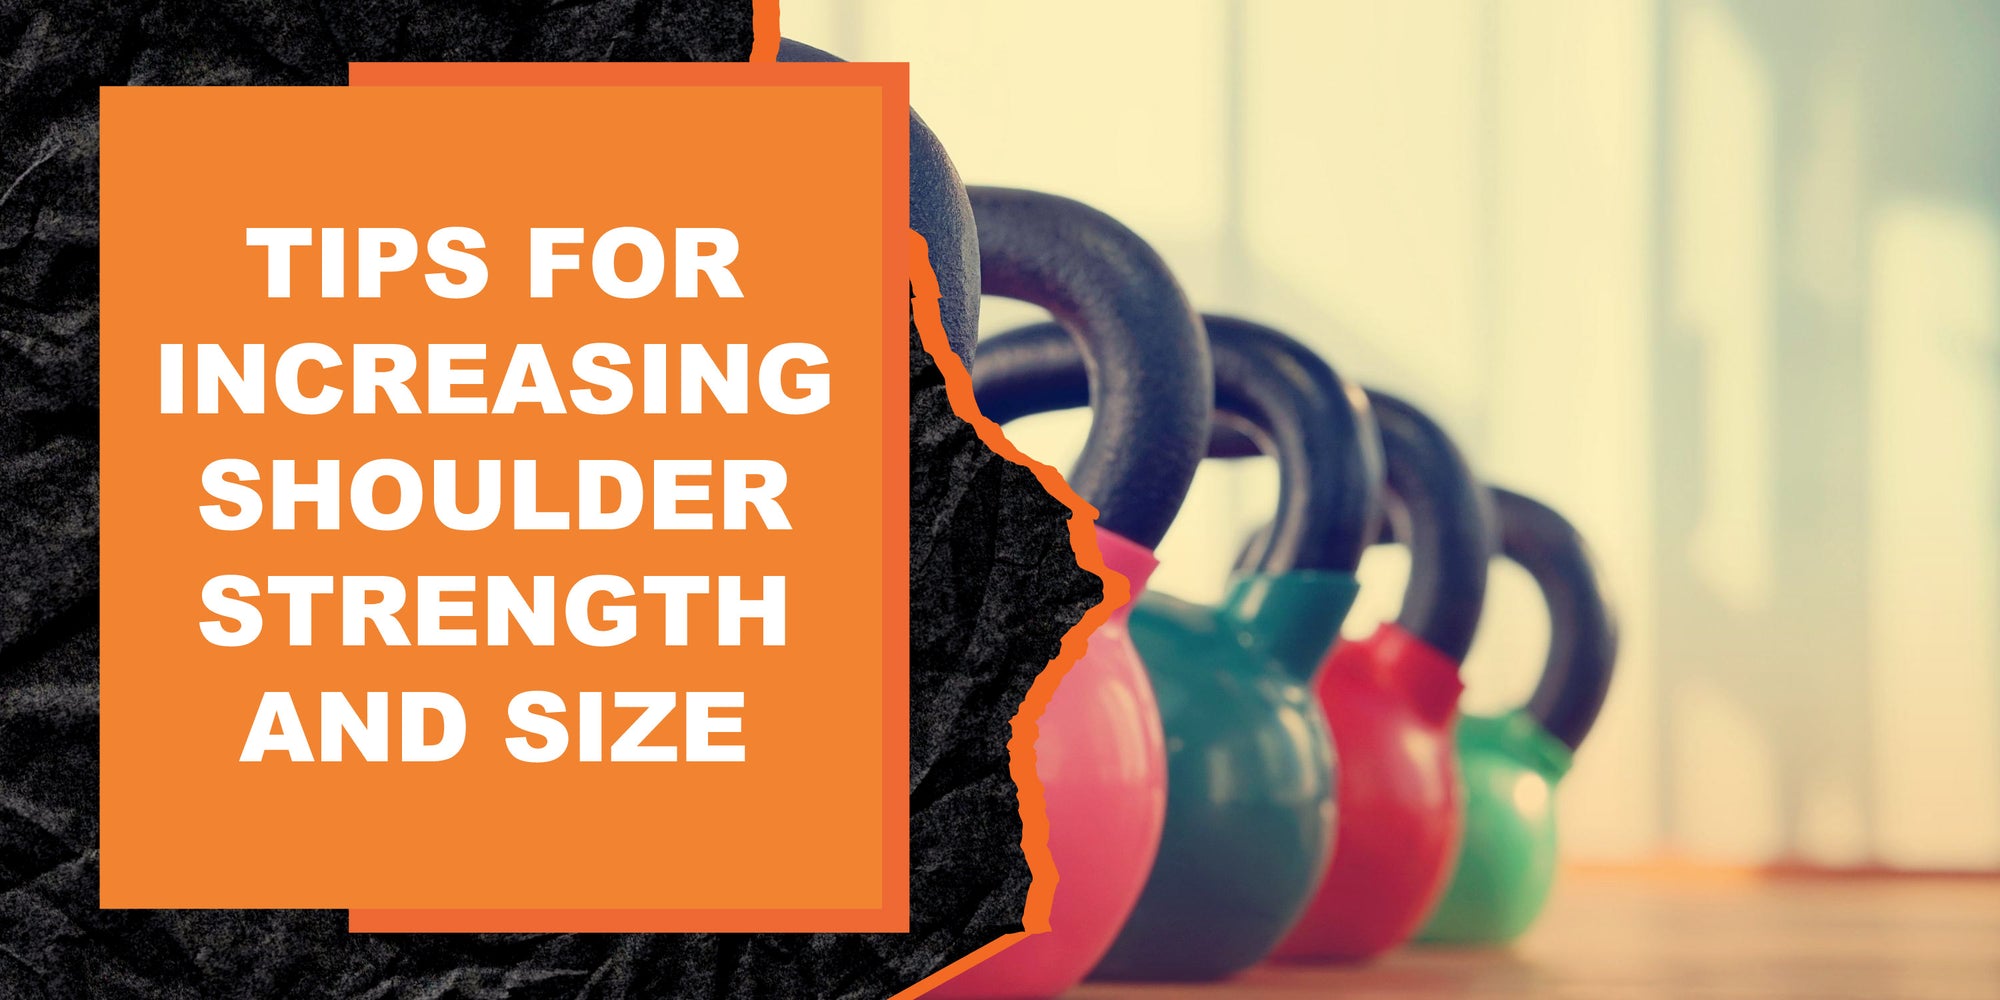 Tips for Increasing Shoulder Strength and Size